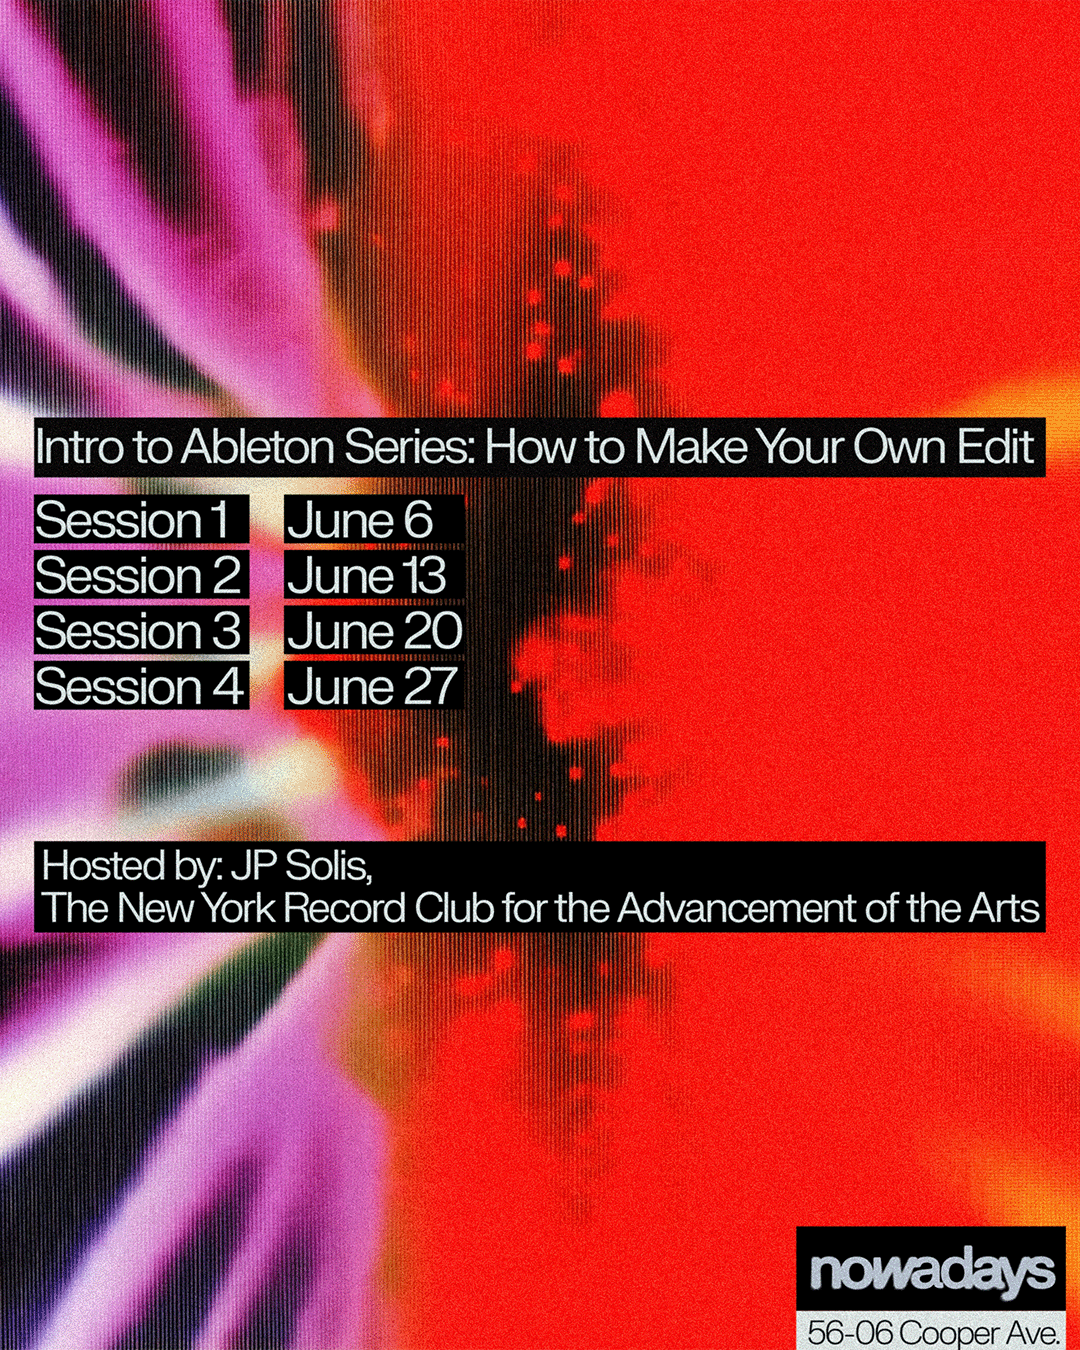 Intro to Ableton Series: How to Make Your Own Edit, Session 2 - フライヤー表